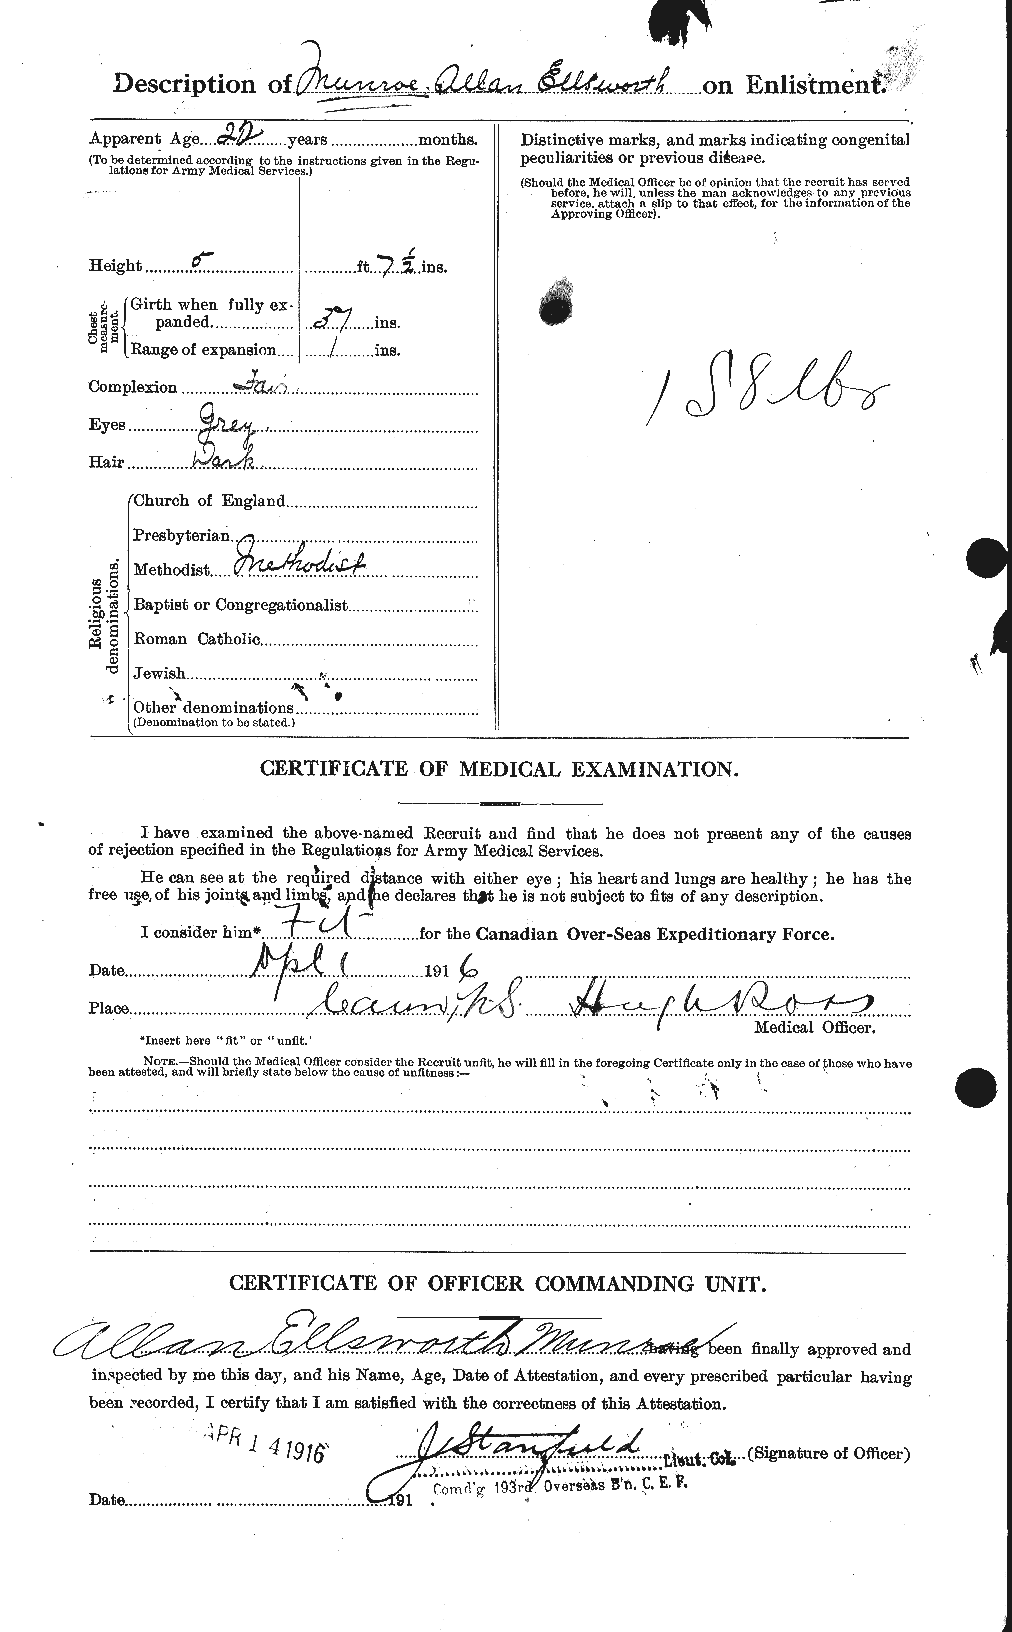 Personnel Records of the First World War - CEF 515347b